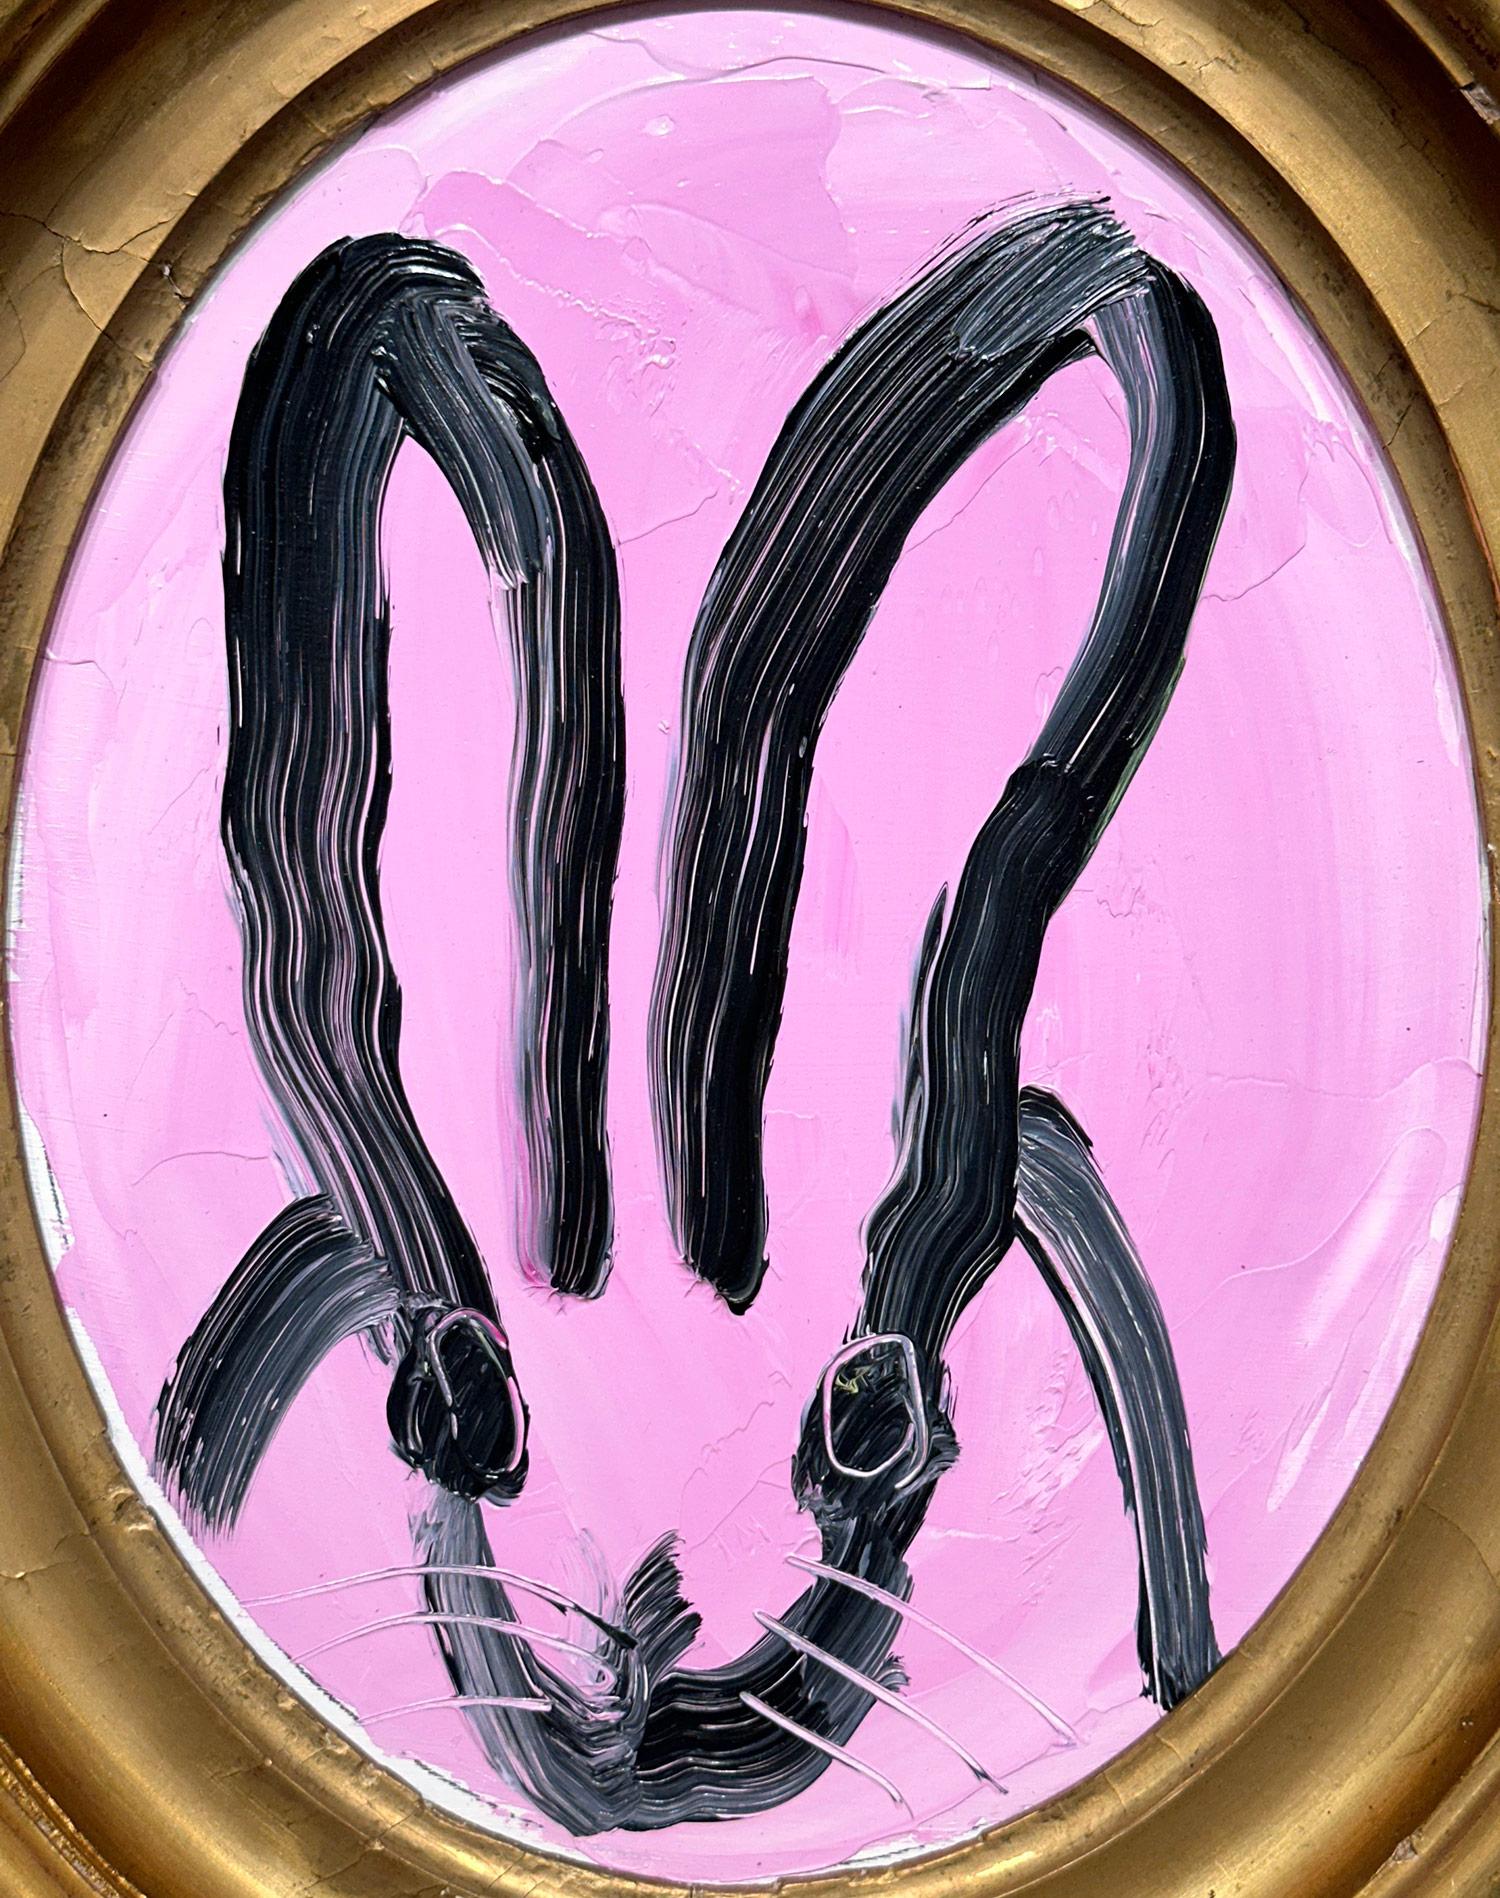 A wonderful composition of one of Slonem's most iconic subjects, Bunnies. This piece depicts a gestural figure of a black bunny on Light Lavender background with thick use of paint. It is housed in a wonderful antique oval frame. Inspired by nature